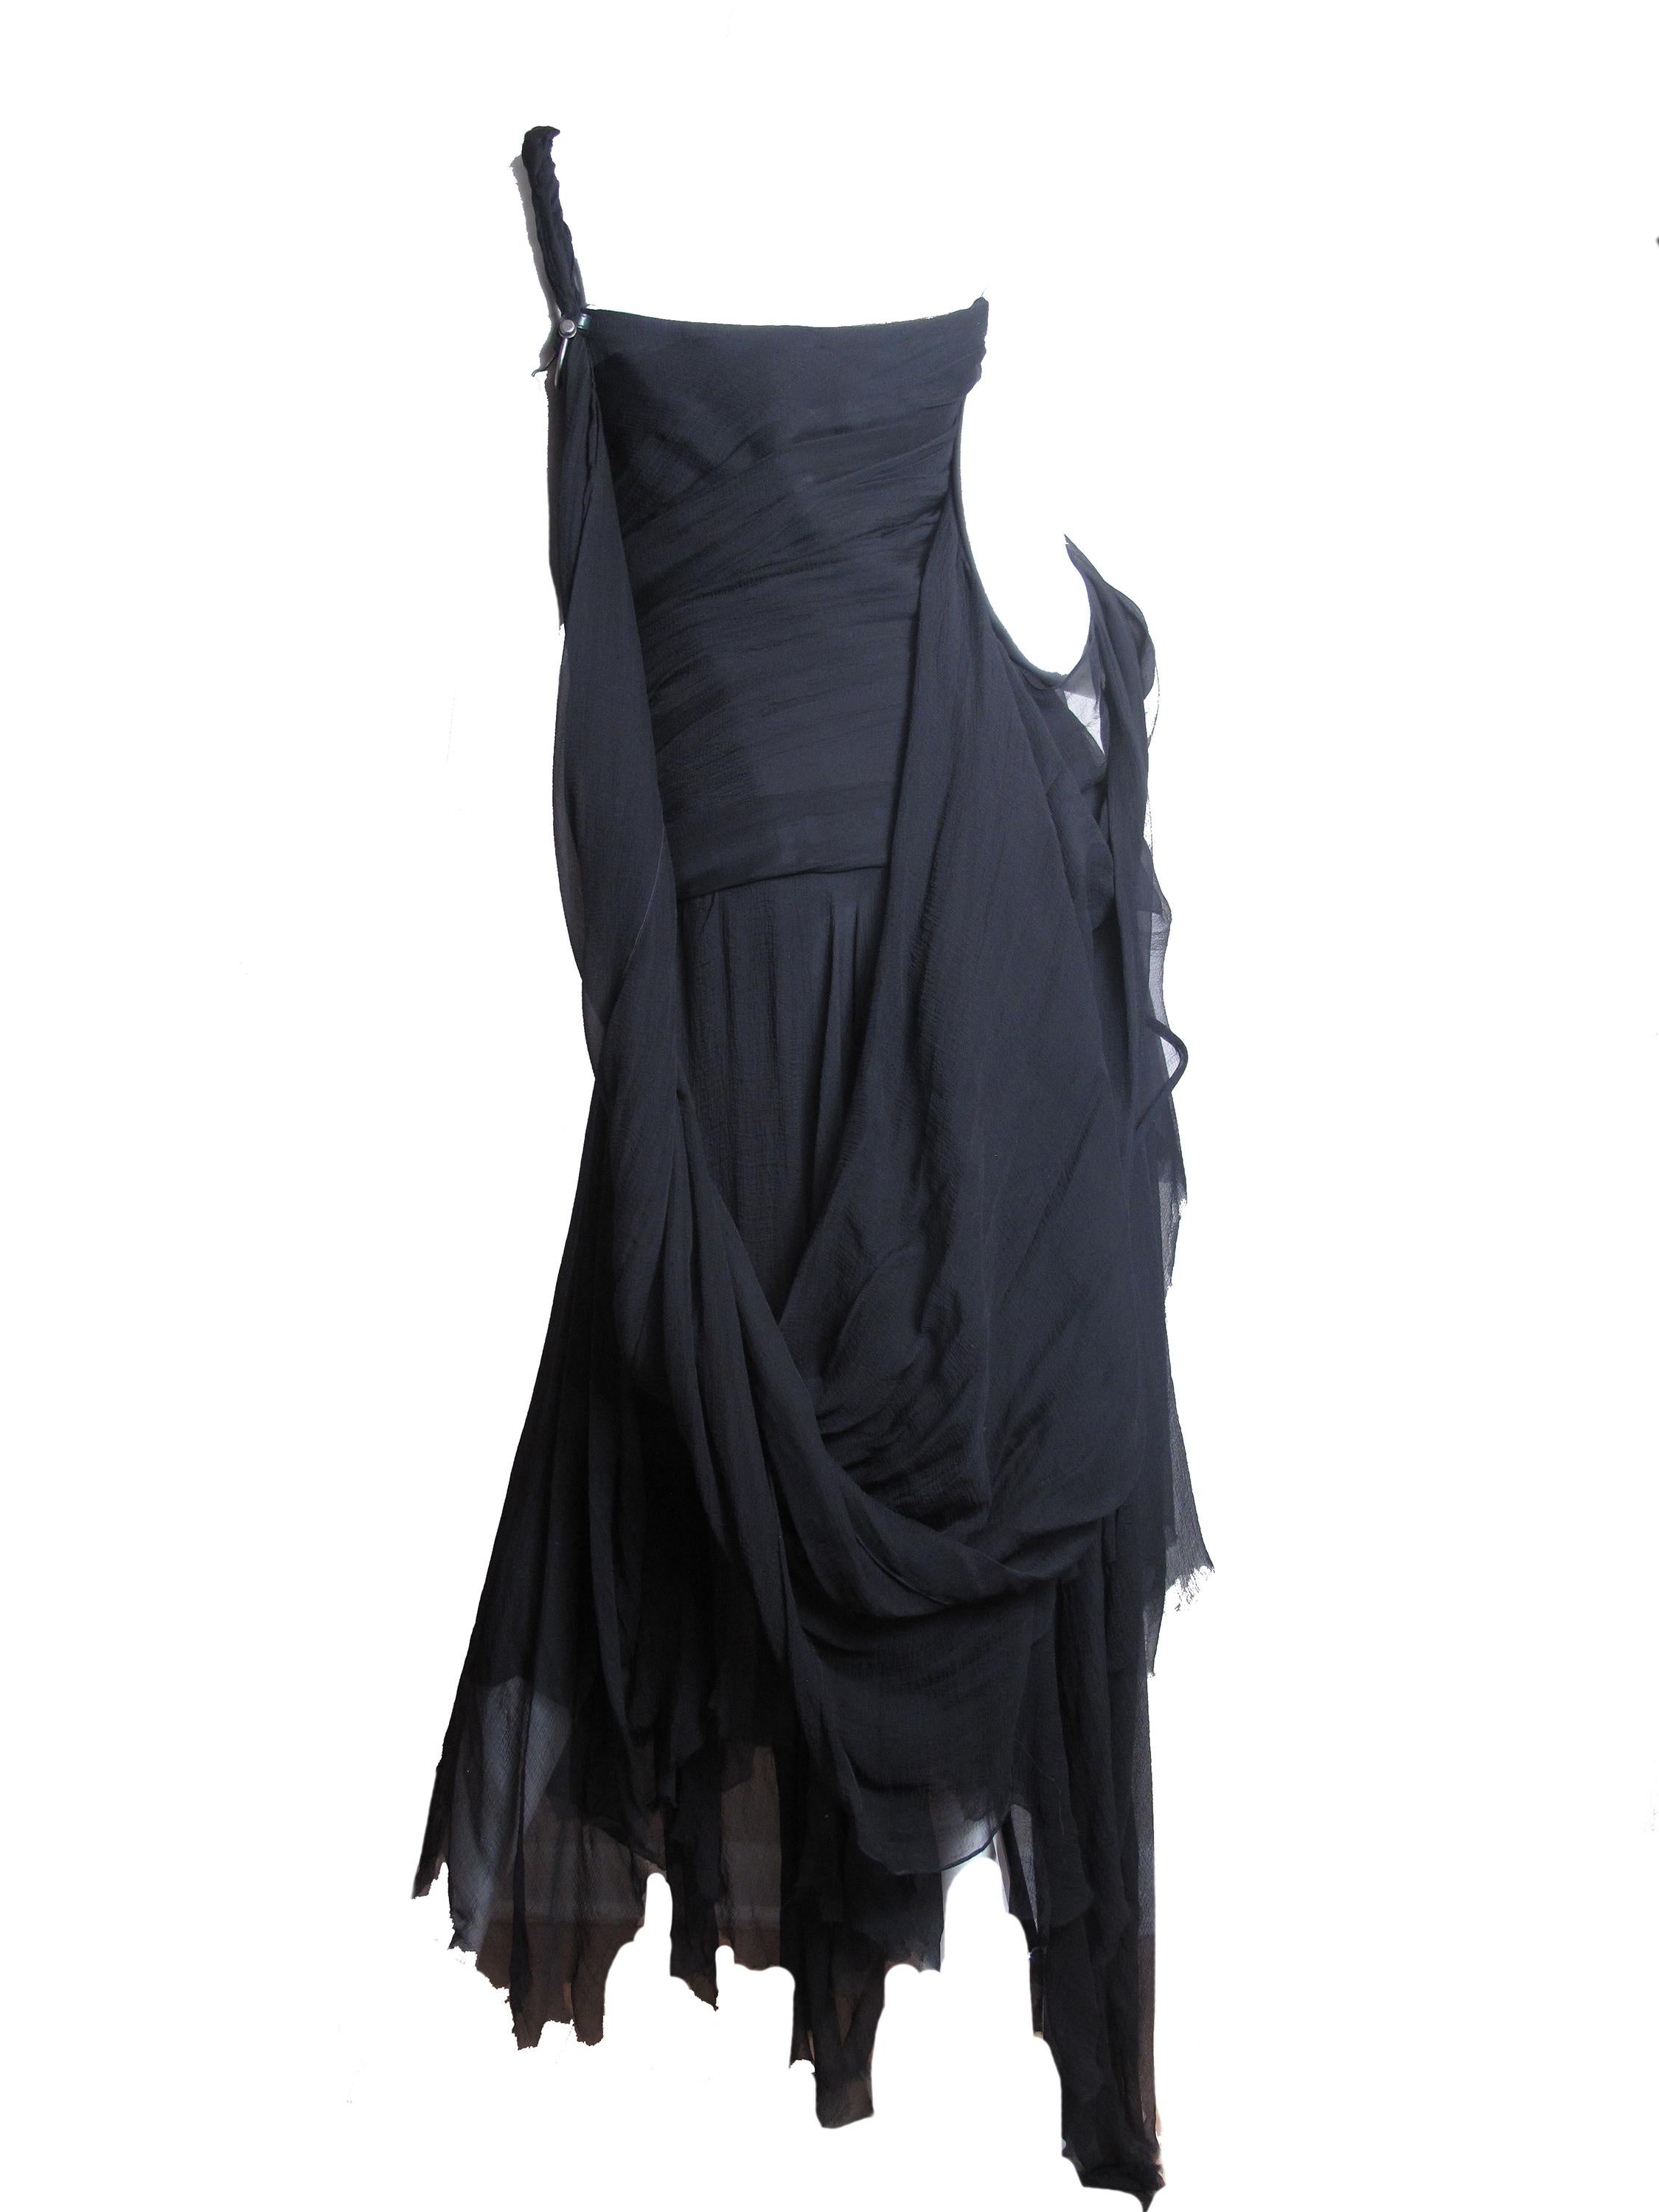 2003 Alexander McQueen Shipwreck gown, runway. Silk Chiffon. 17th century like corset, braided strap.   Condition: Excellent. Size 46 / Size M
36